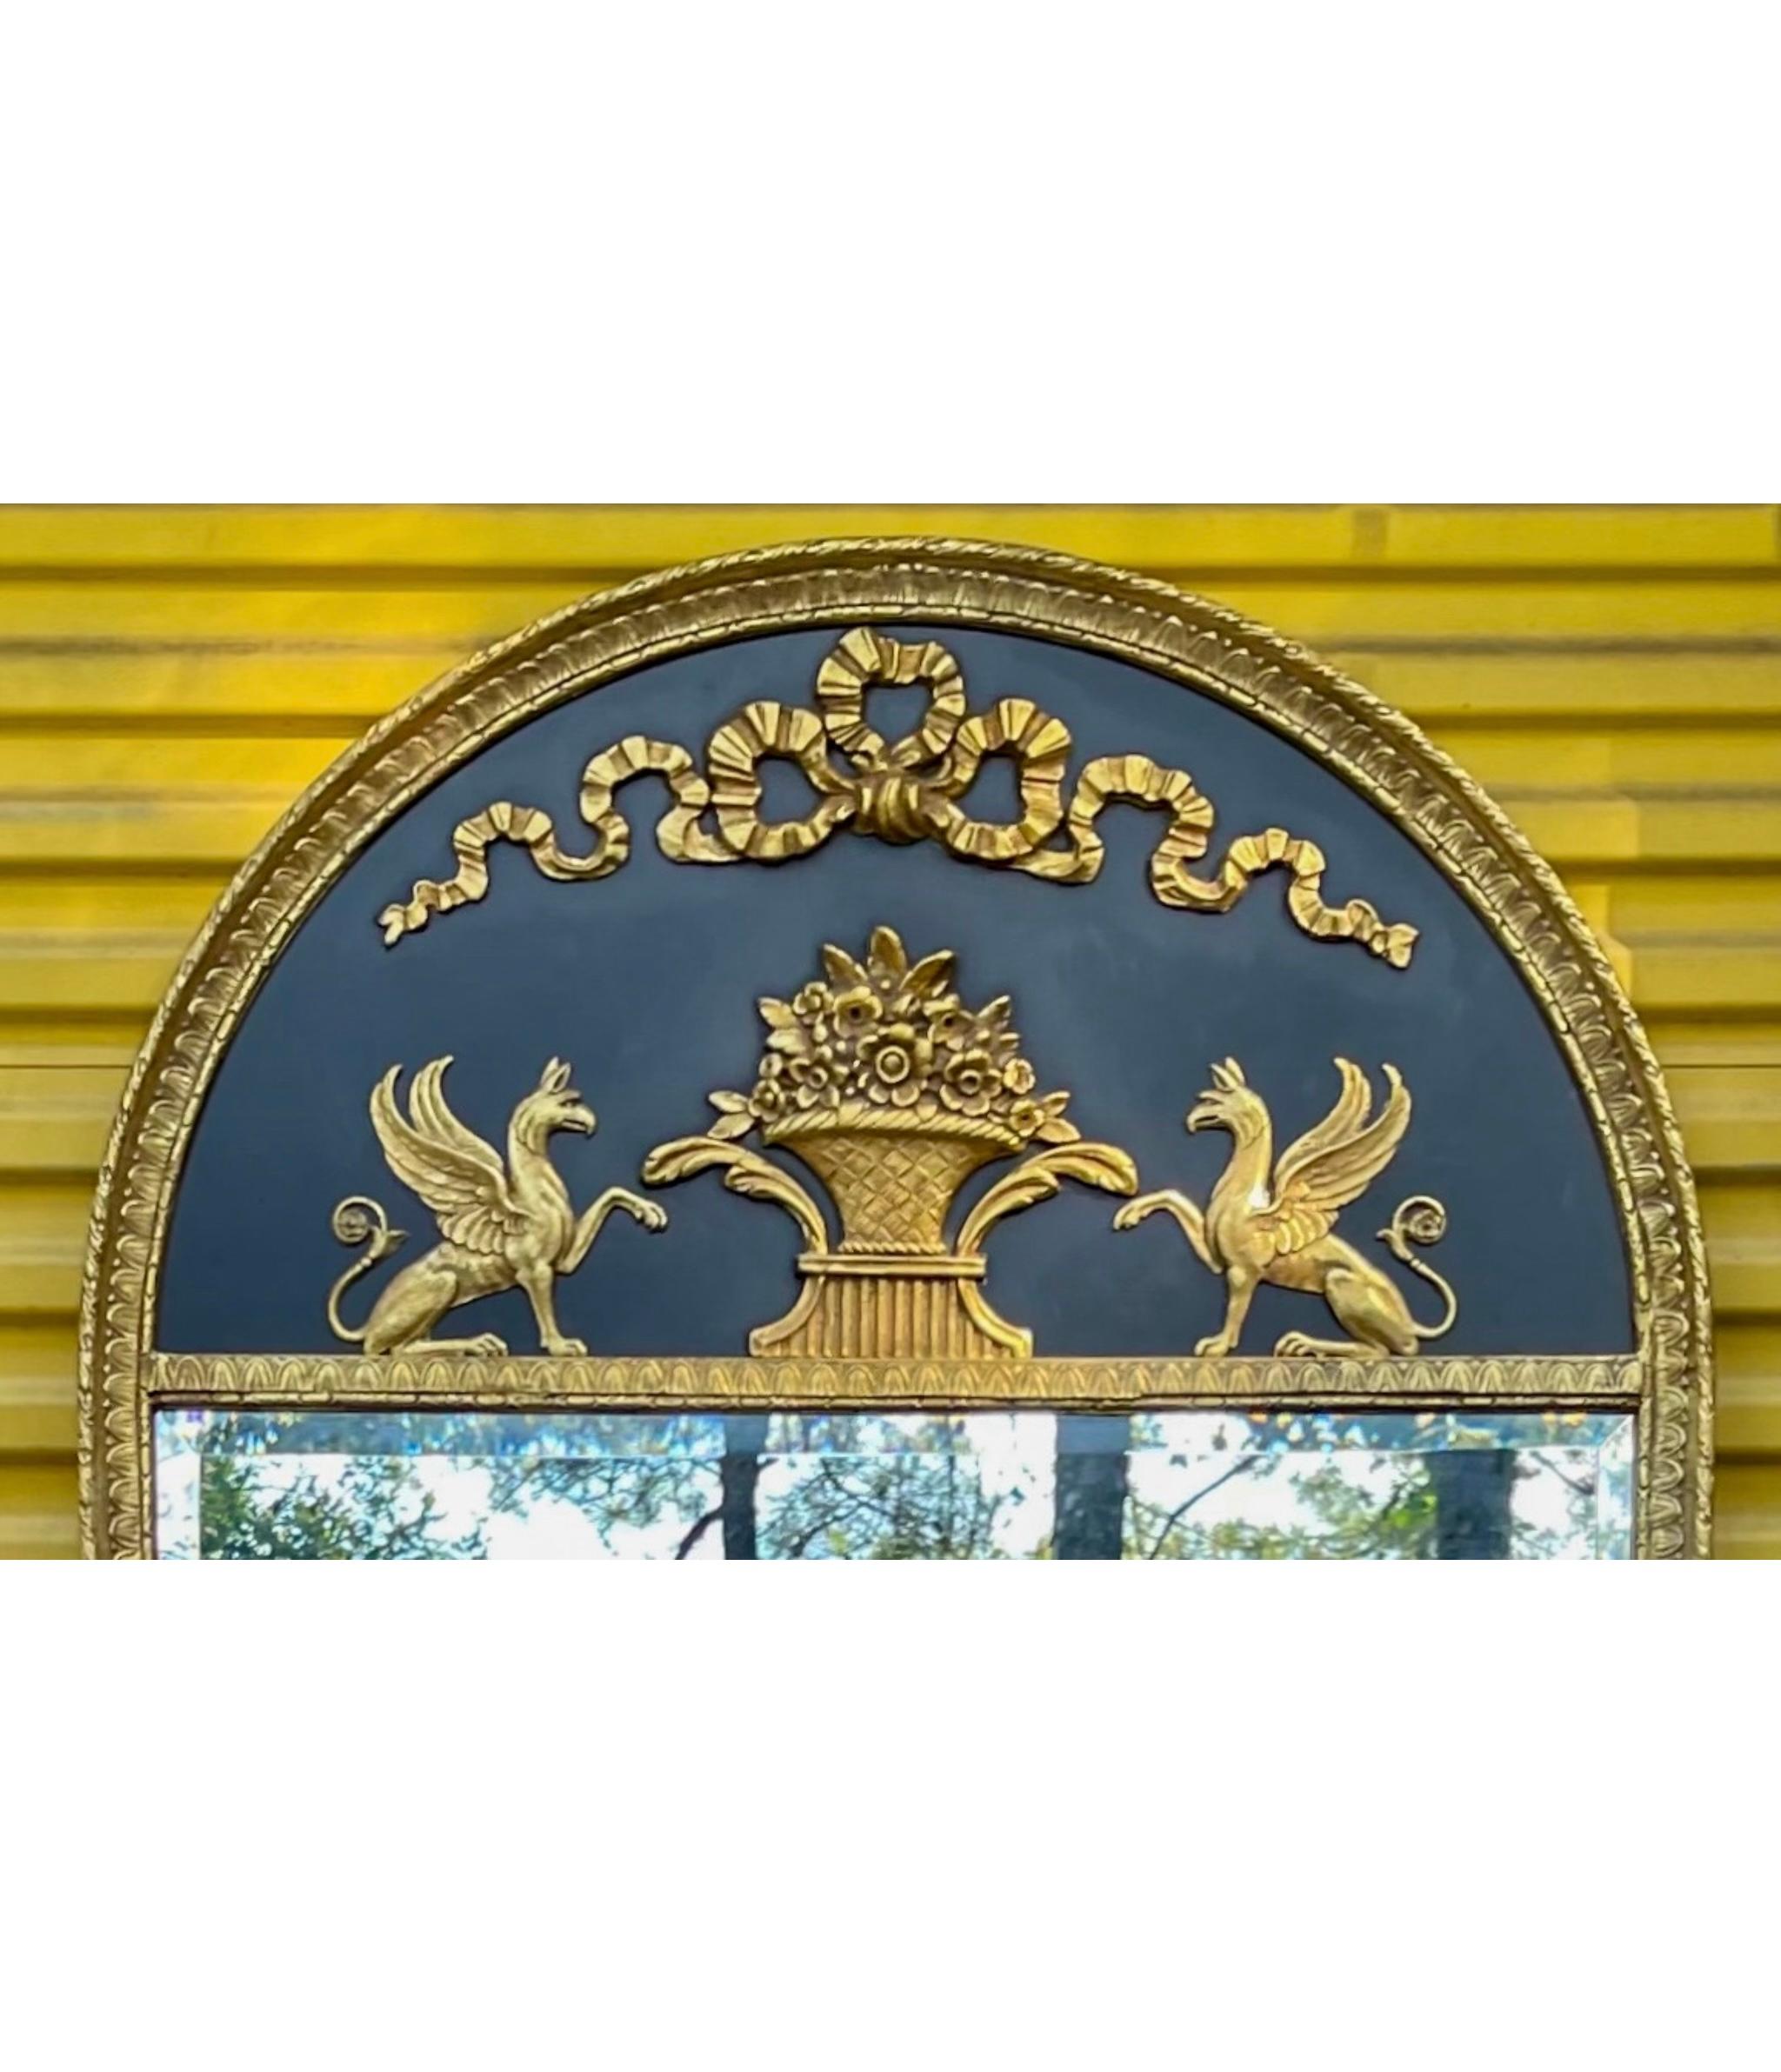 1970s Large Scale Neo-Classical Style Gilt Trumeau Mirror with Facing Griffins  For Sale 3